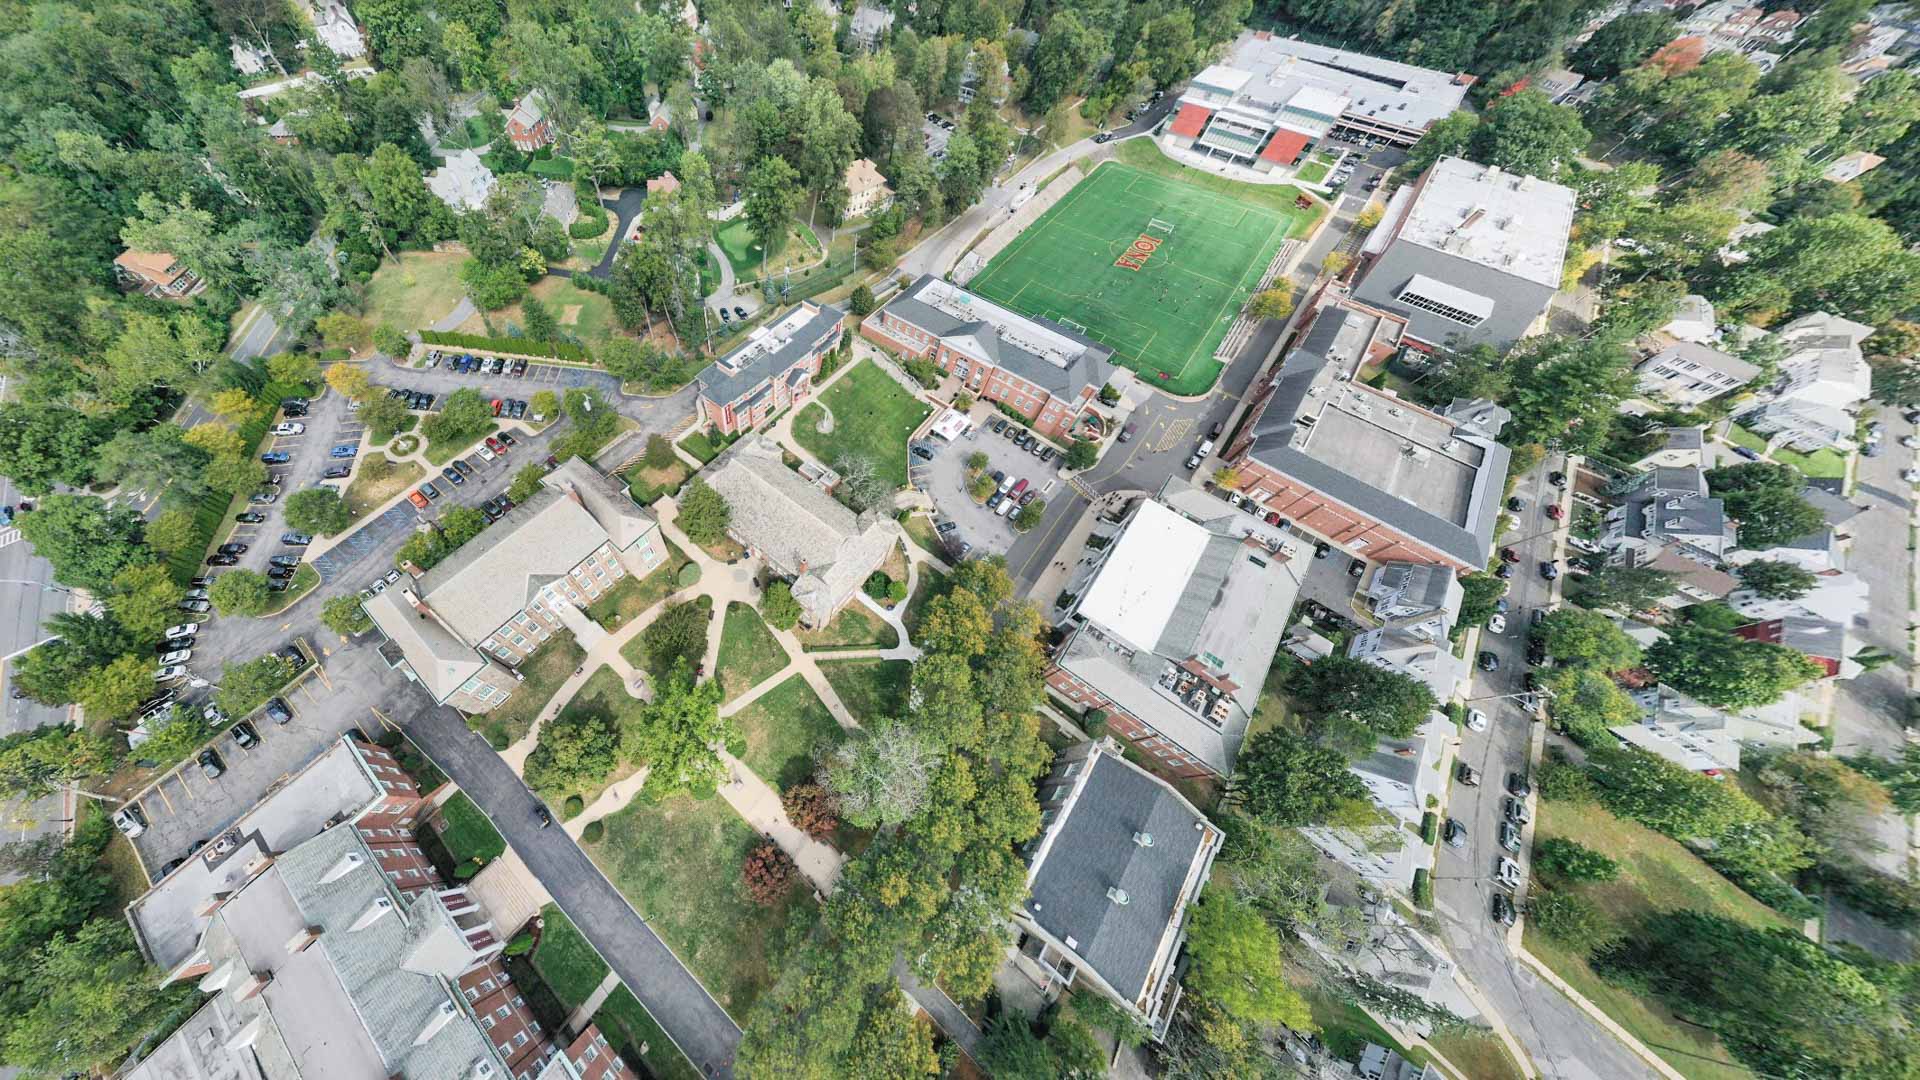 IONA COLLEGE AERIAL VIEW